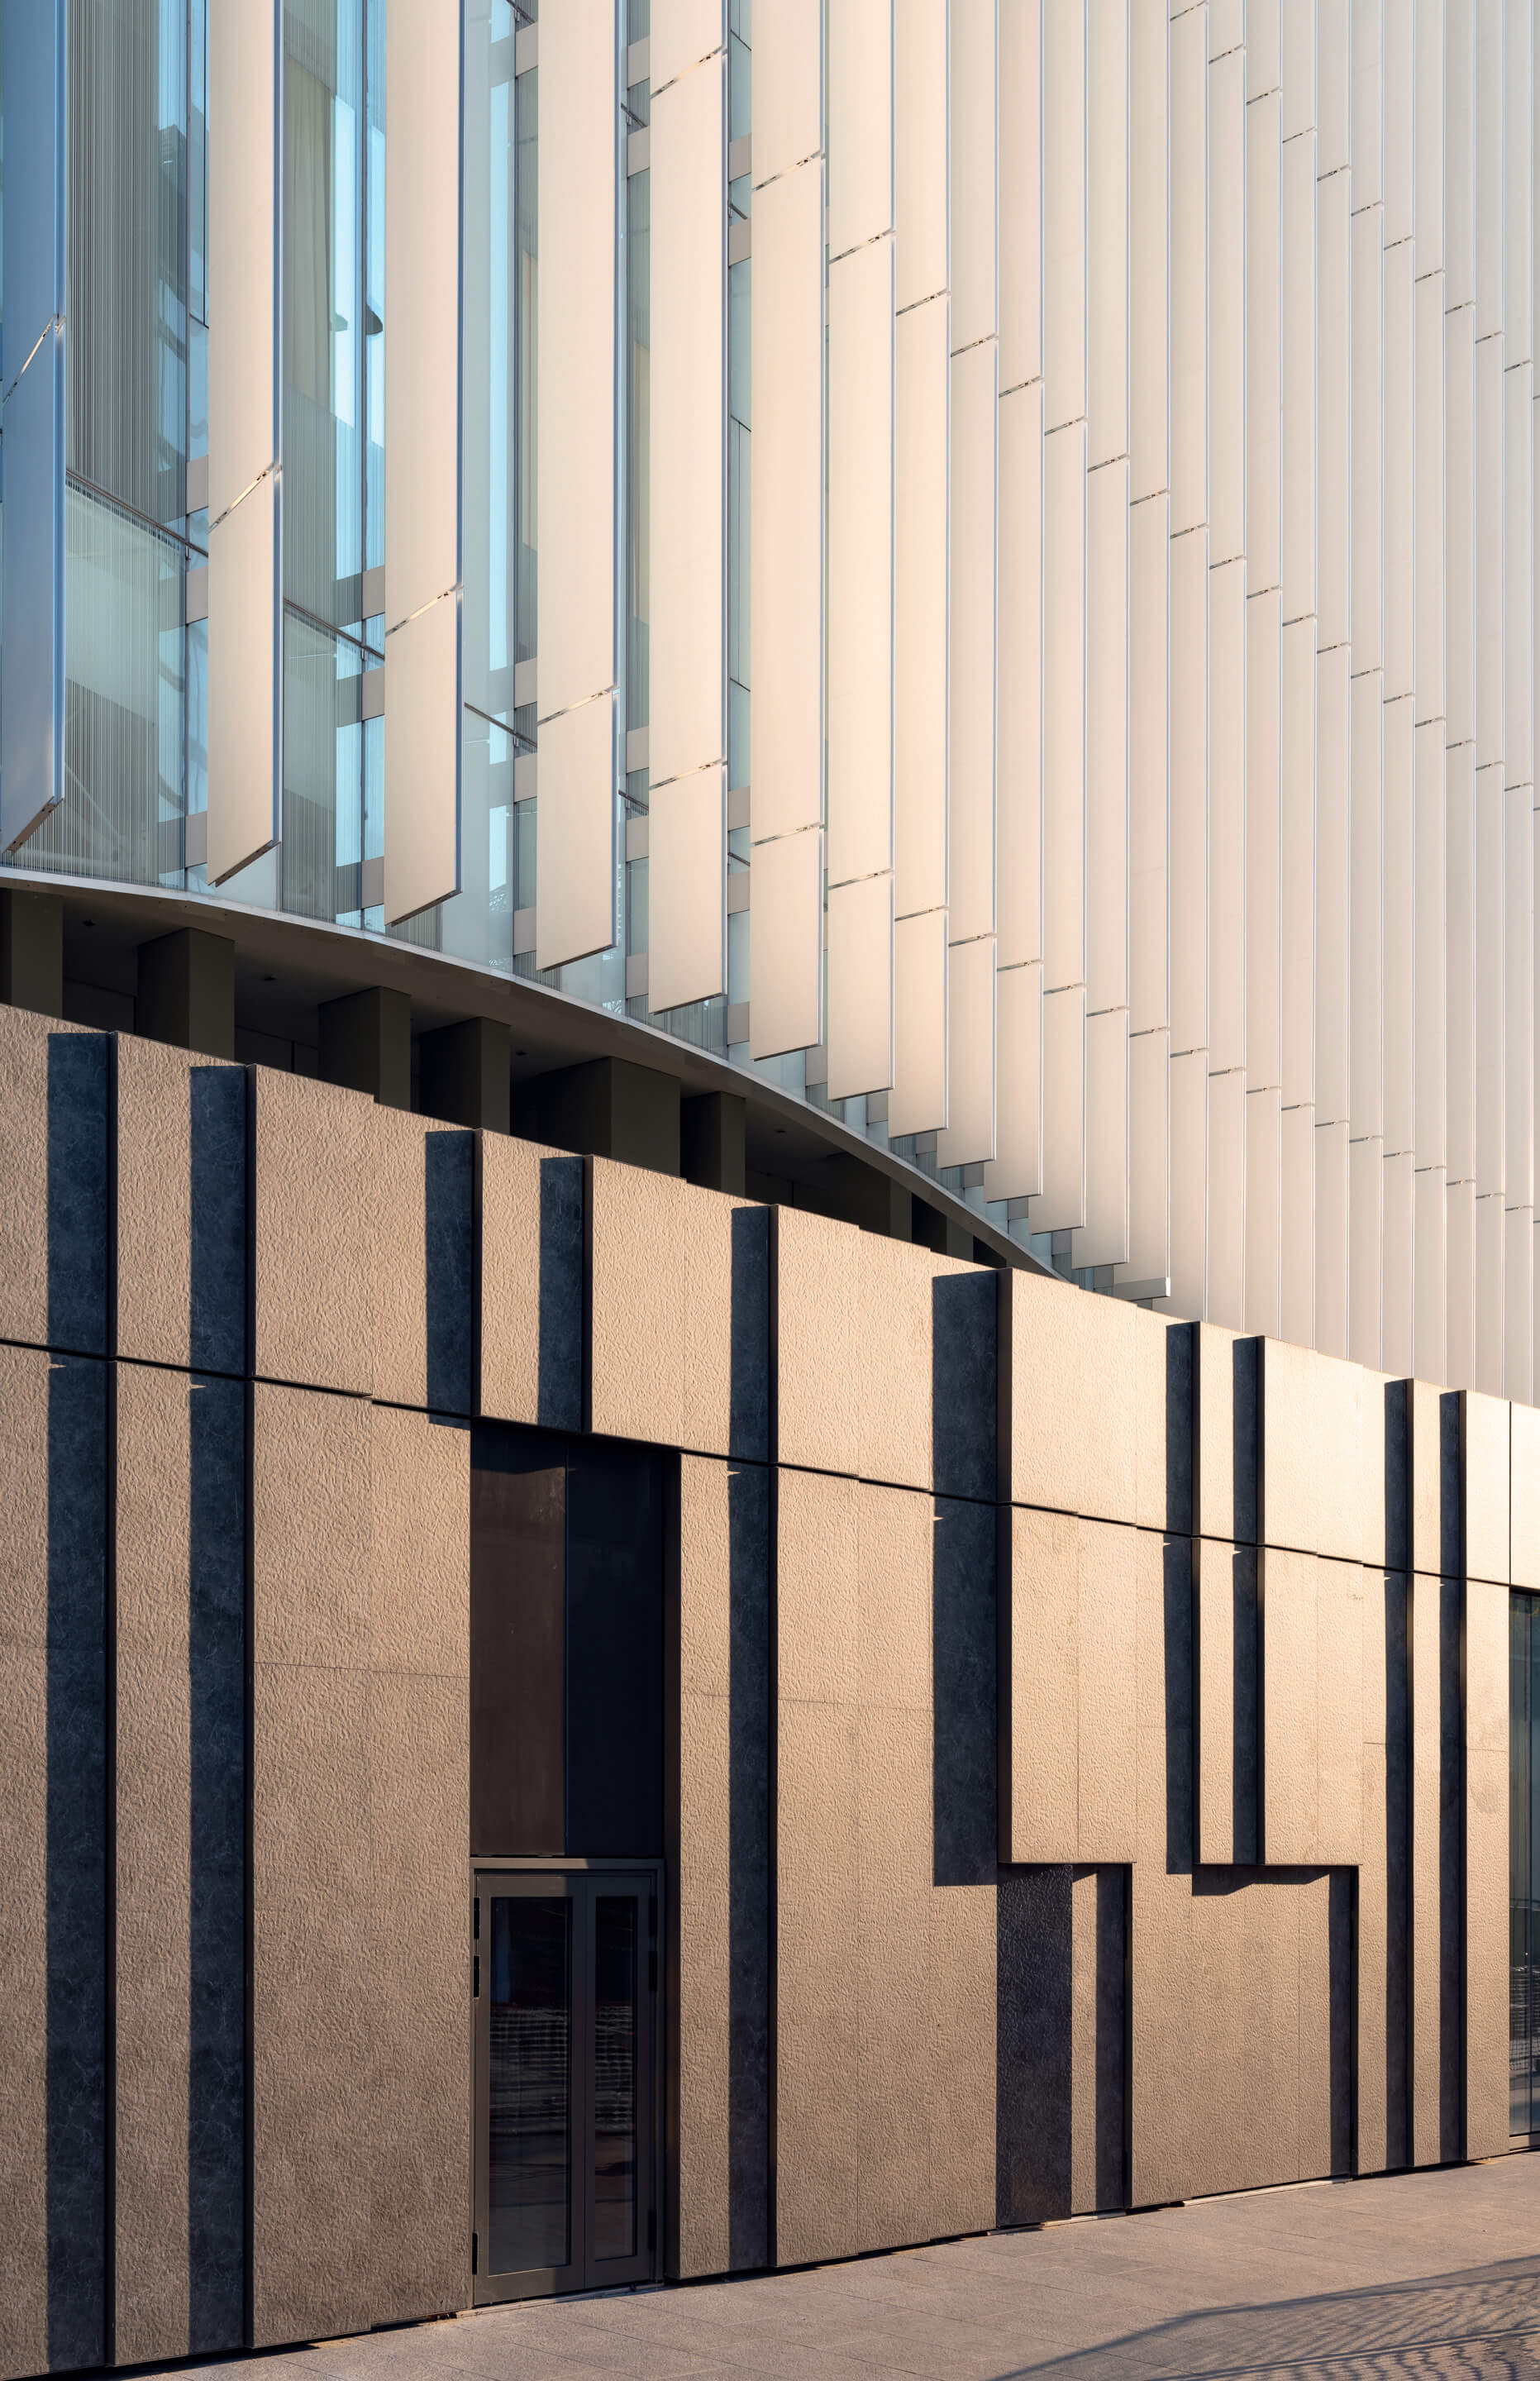 The Impact of Vertical Fins Façade on Building Performance: A New